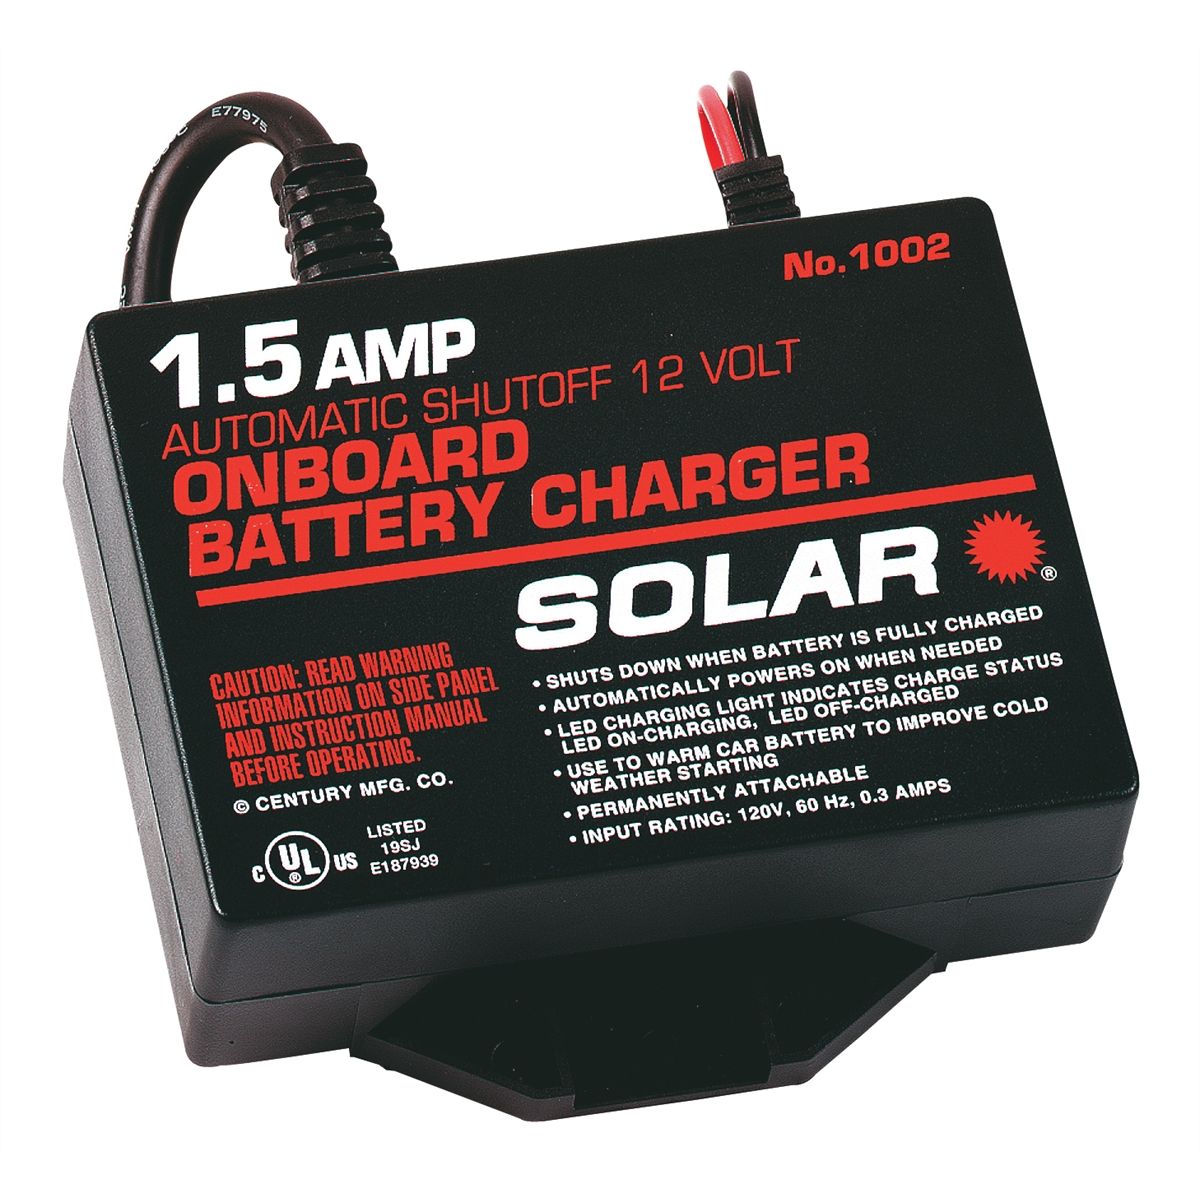 NEW 12V 6Amp Battery booster Charger Car van 12 V motorcycle 6A trickle charge 